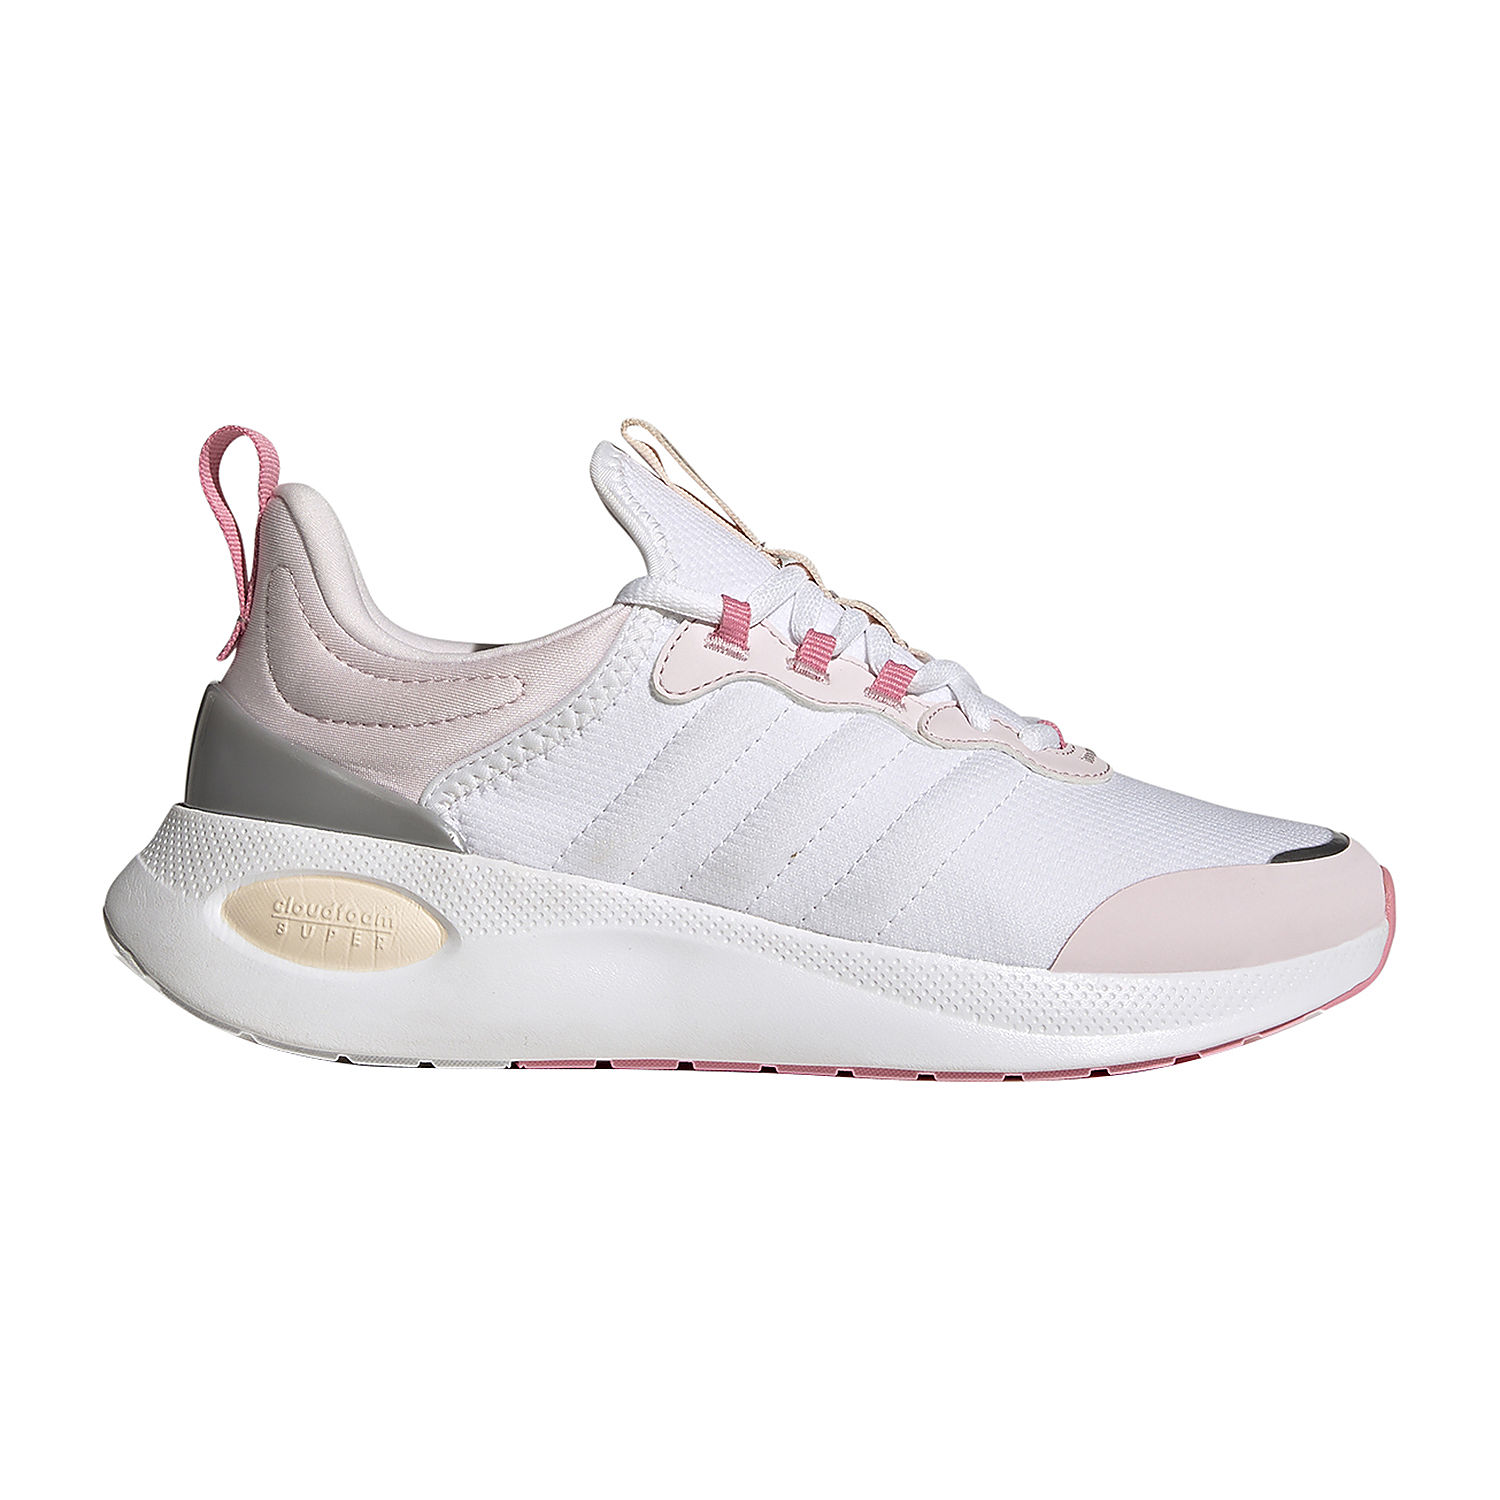 adidas Puremotion Super Womens Walking Color: White JCPenney